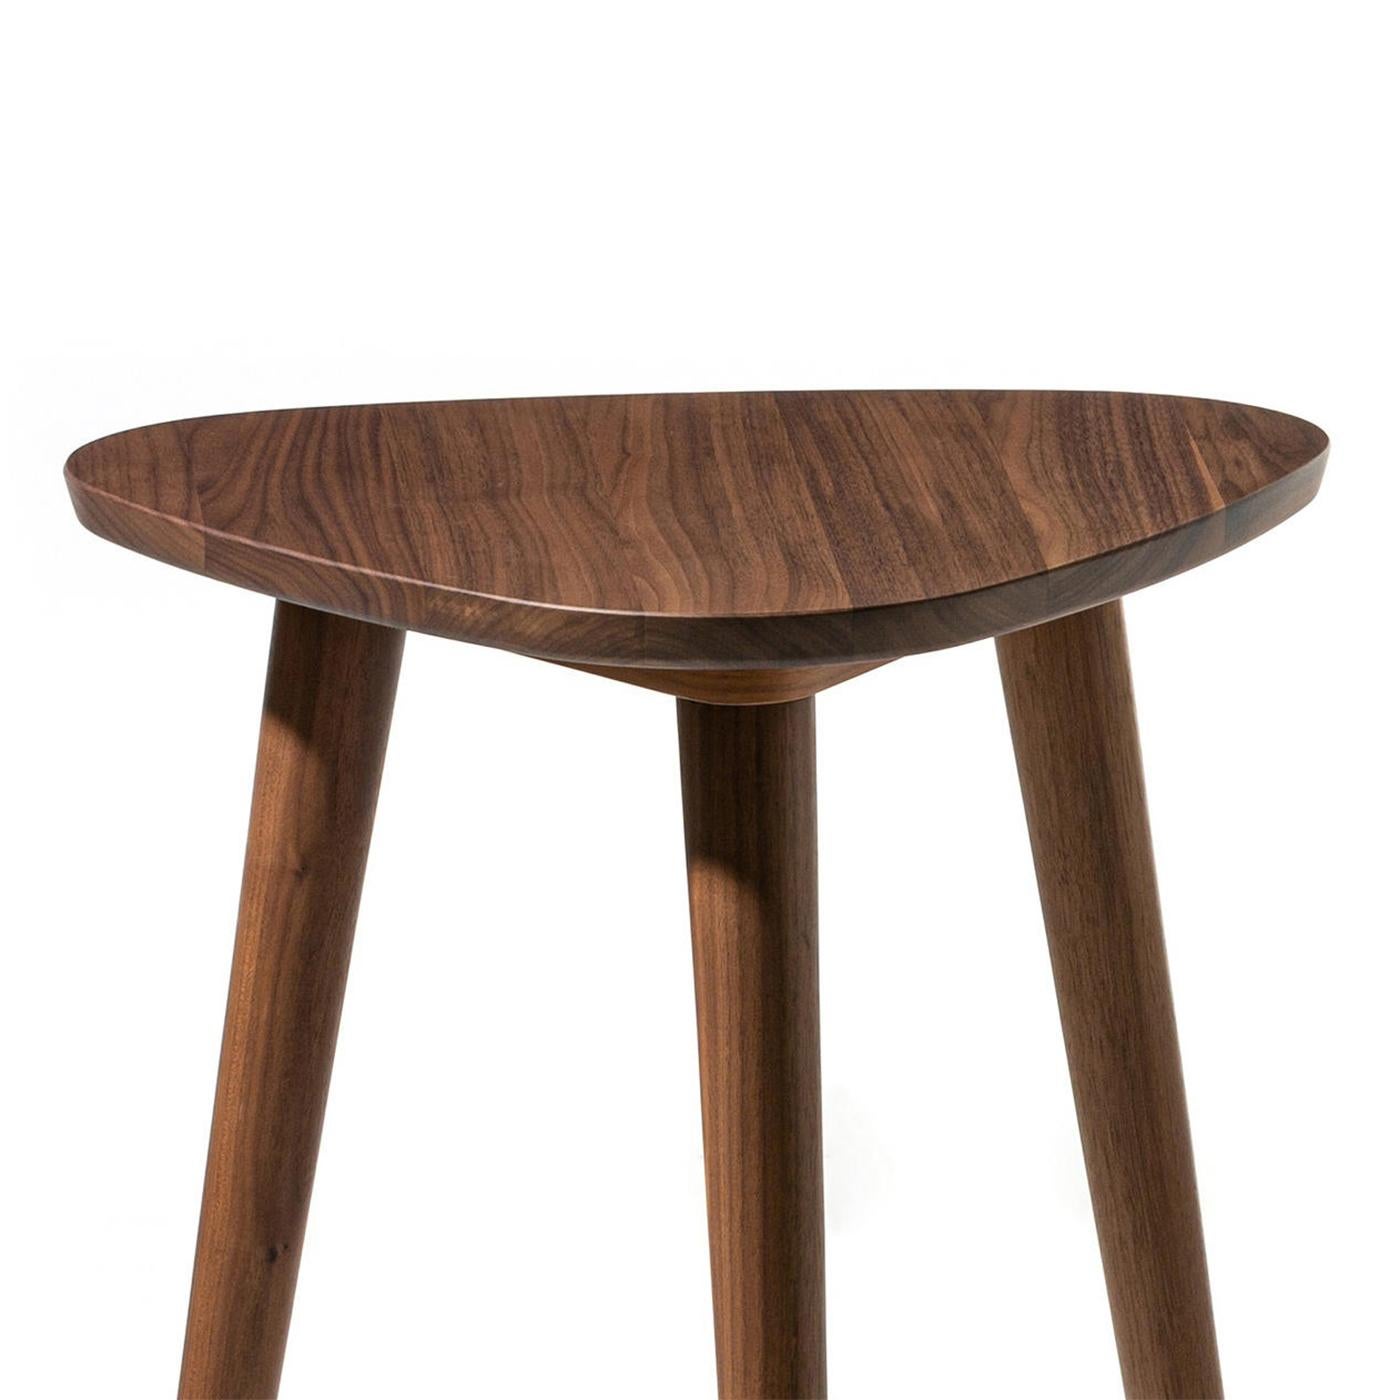 Side table Mediator walnut all in solid 
walnut wood, side table with 3 feet.